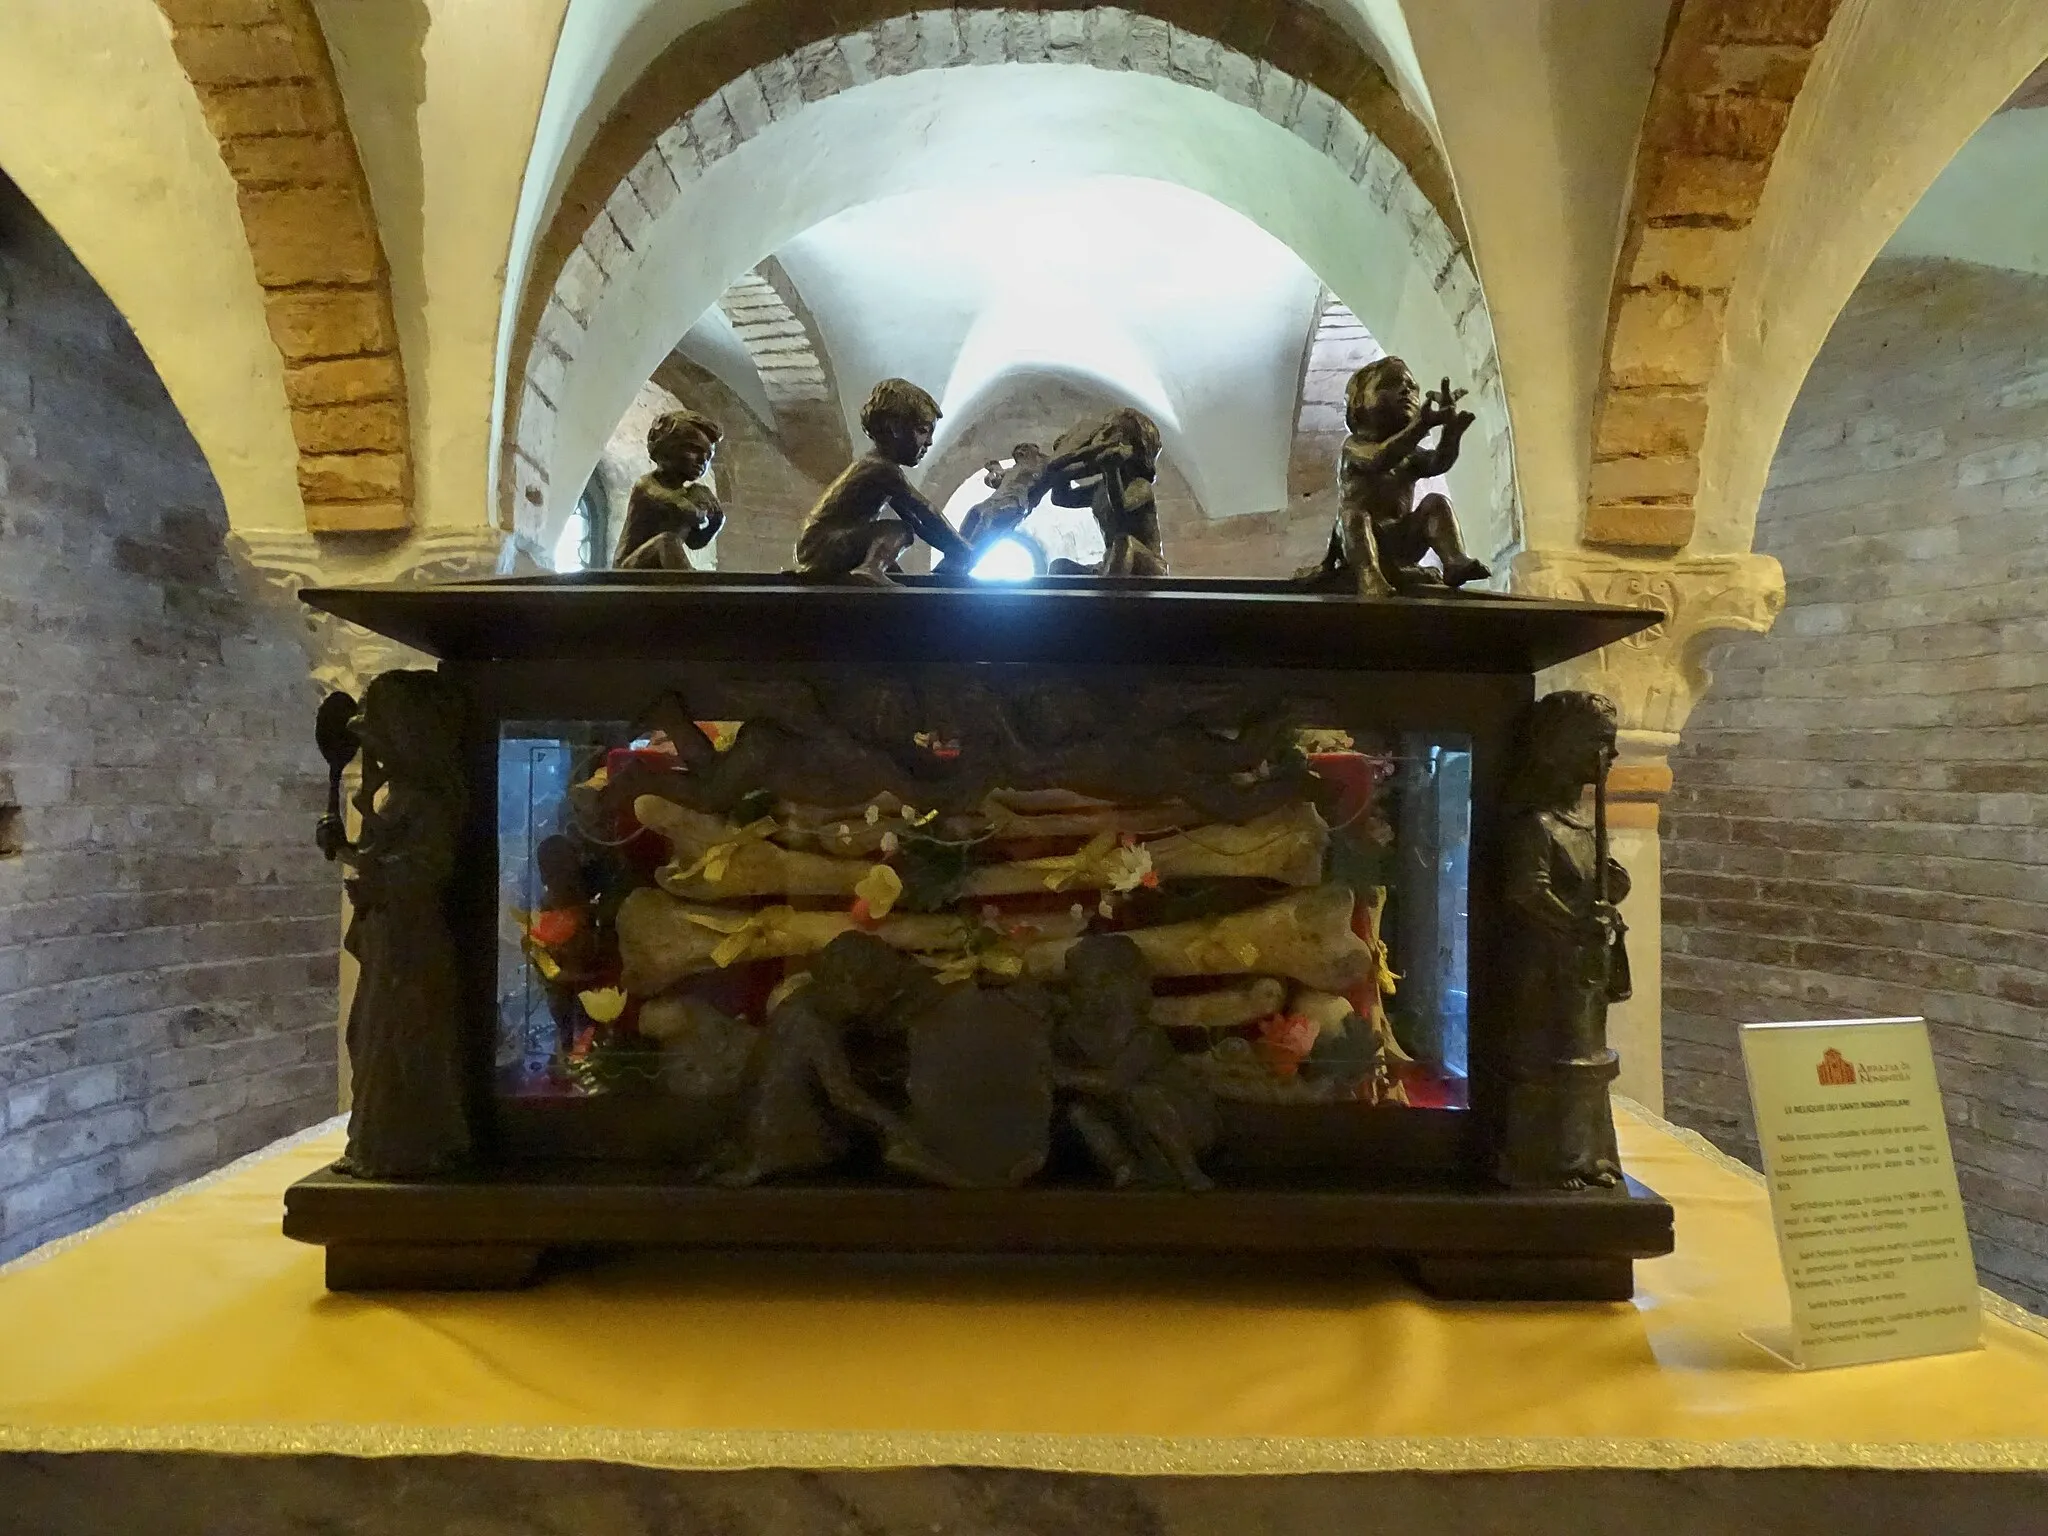 Photo showing: Relics of the Nonantolan Saints in the Abbey of Saint Sylvester in Nonantola: St Anselm, St Hadrian, St Senesio, St Teonas, St Fusca, St Anseride. The Reliquary was made in 1990.